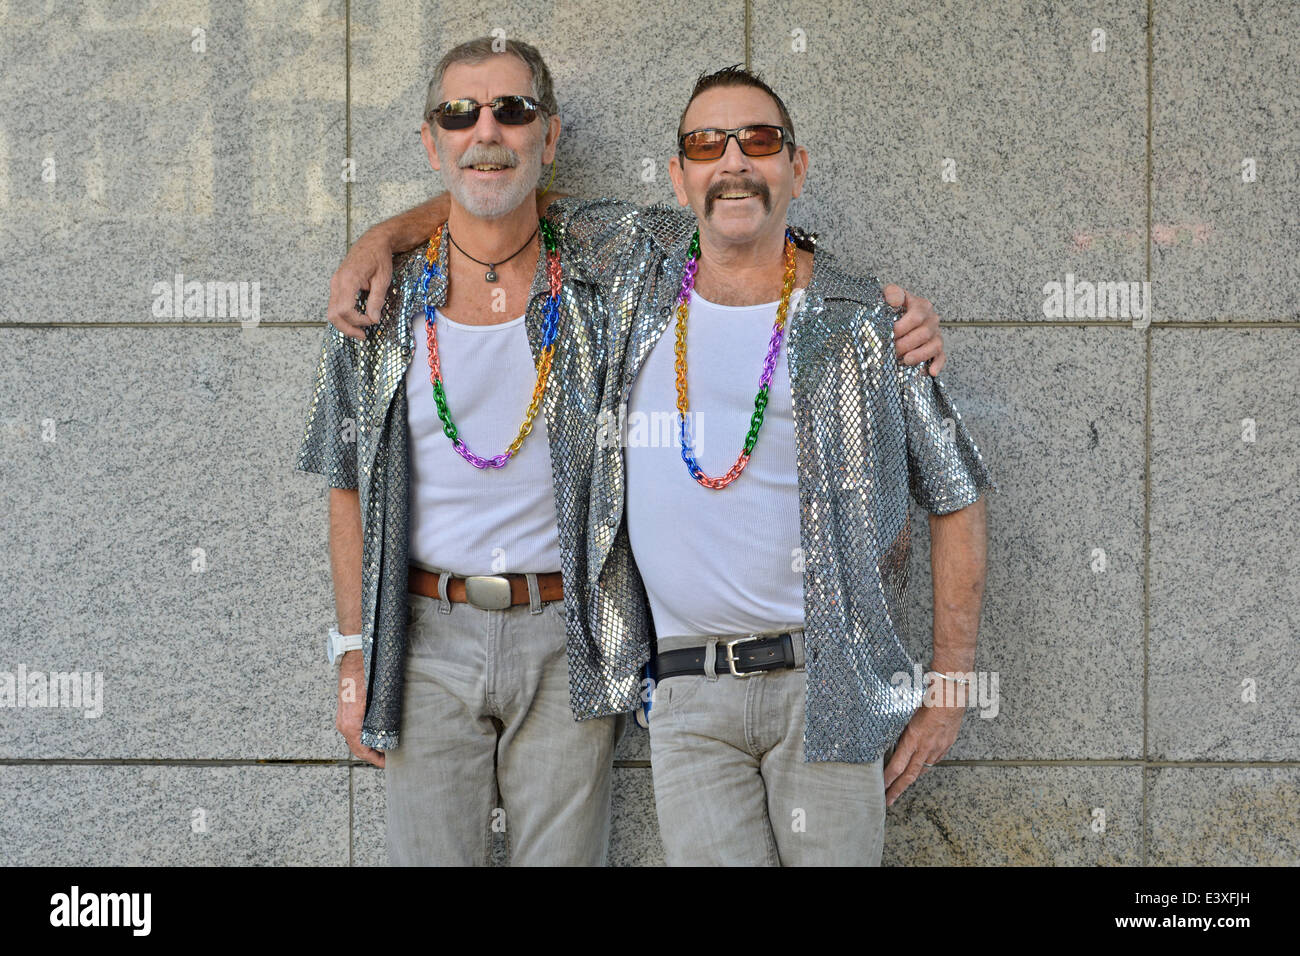 Portrait of a gay couple from Hawaii who've been together for over 35 years. On the way to NYC Gay Pride Parade. Stock Photo